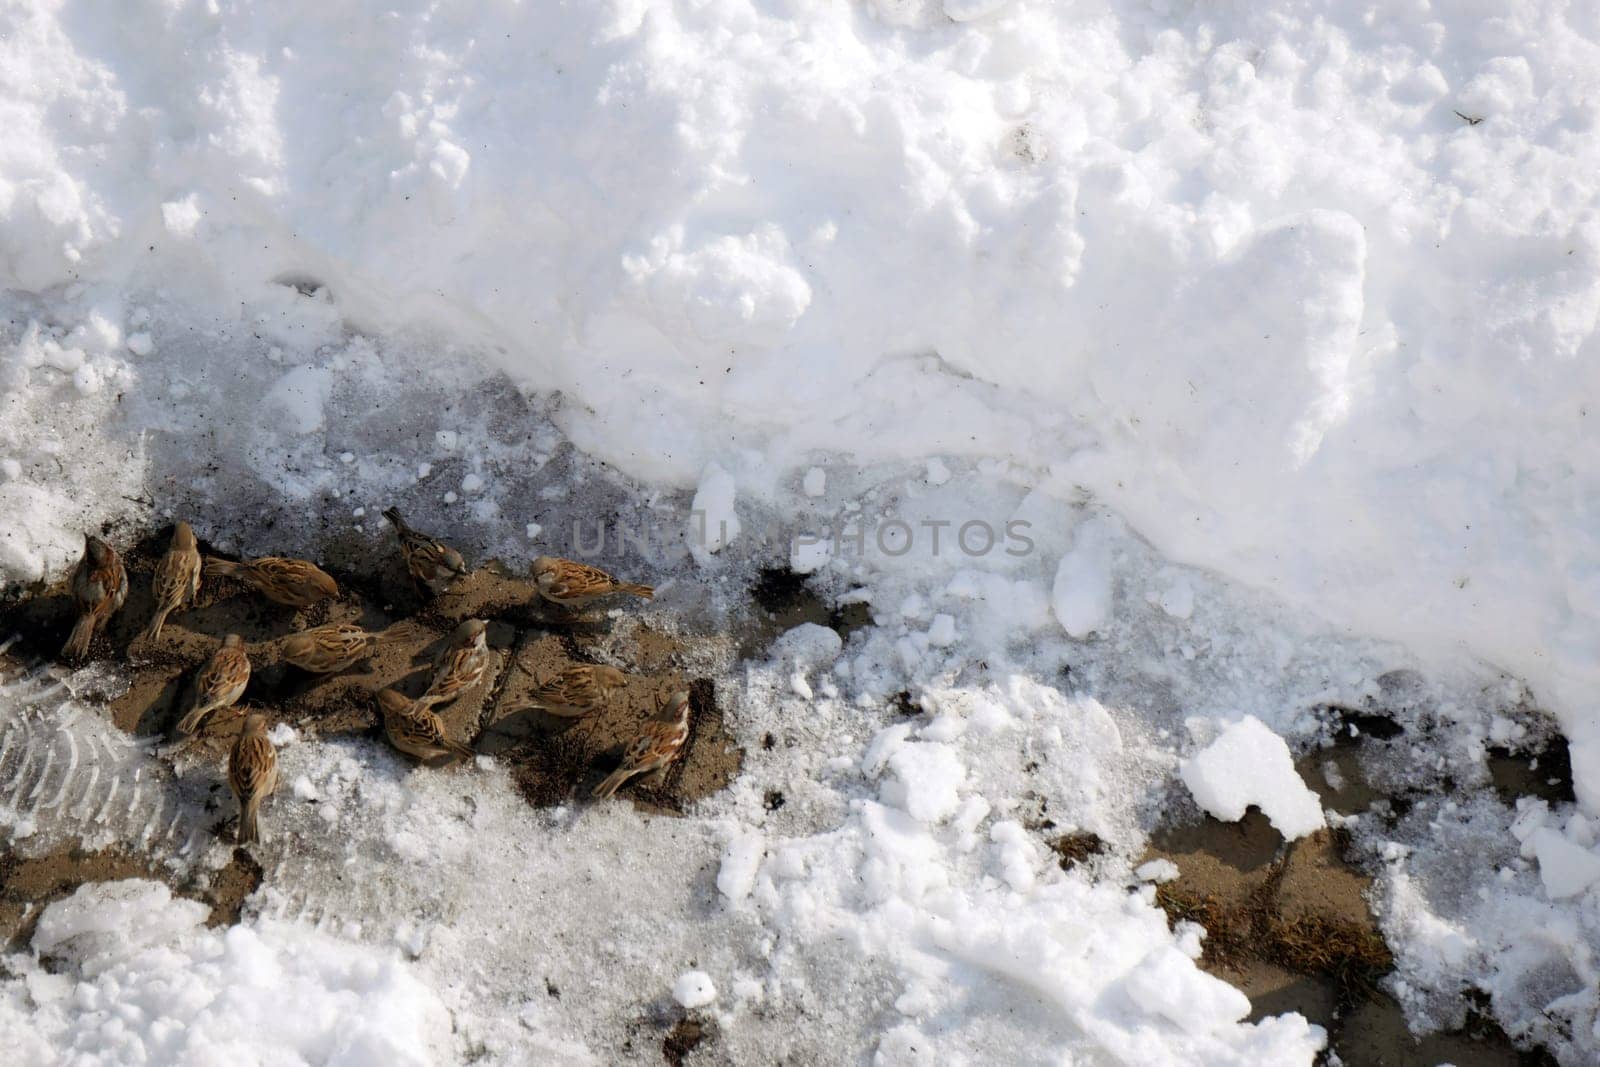 Sparrows, winter bears and sparrows looking for food in the snow in winter,